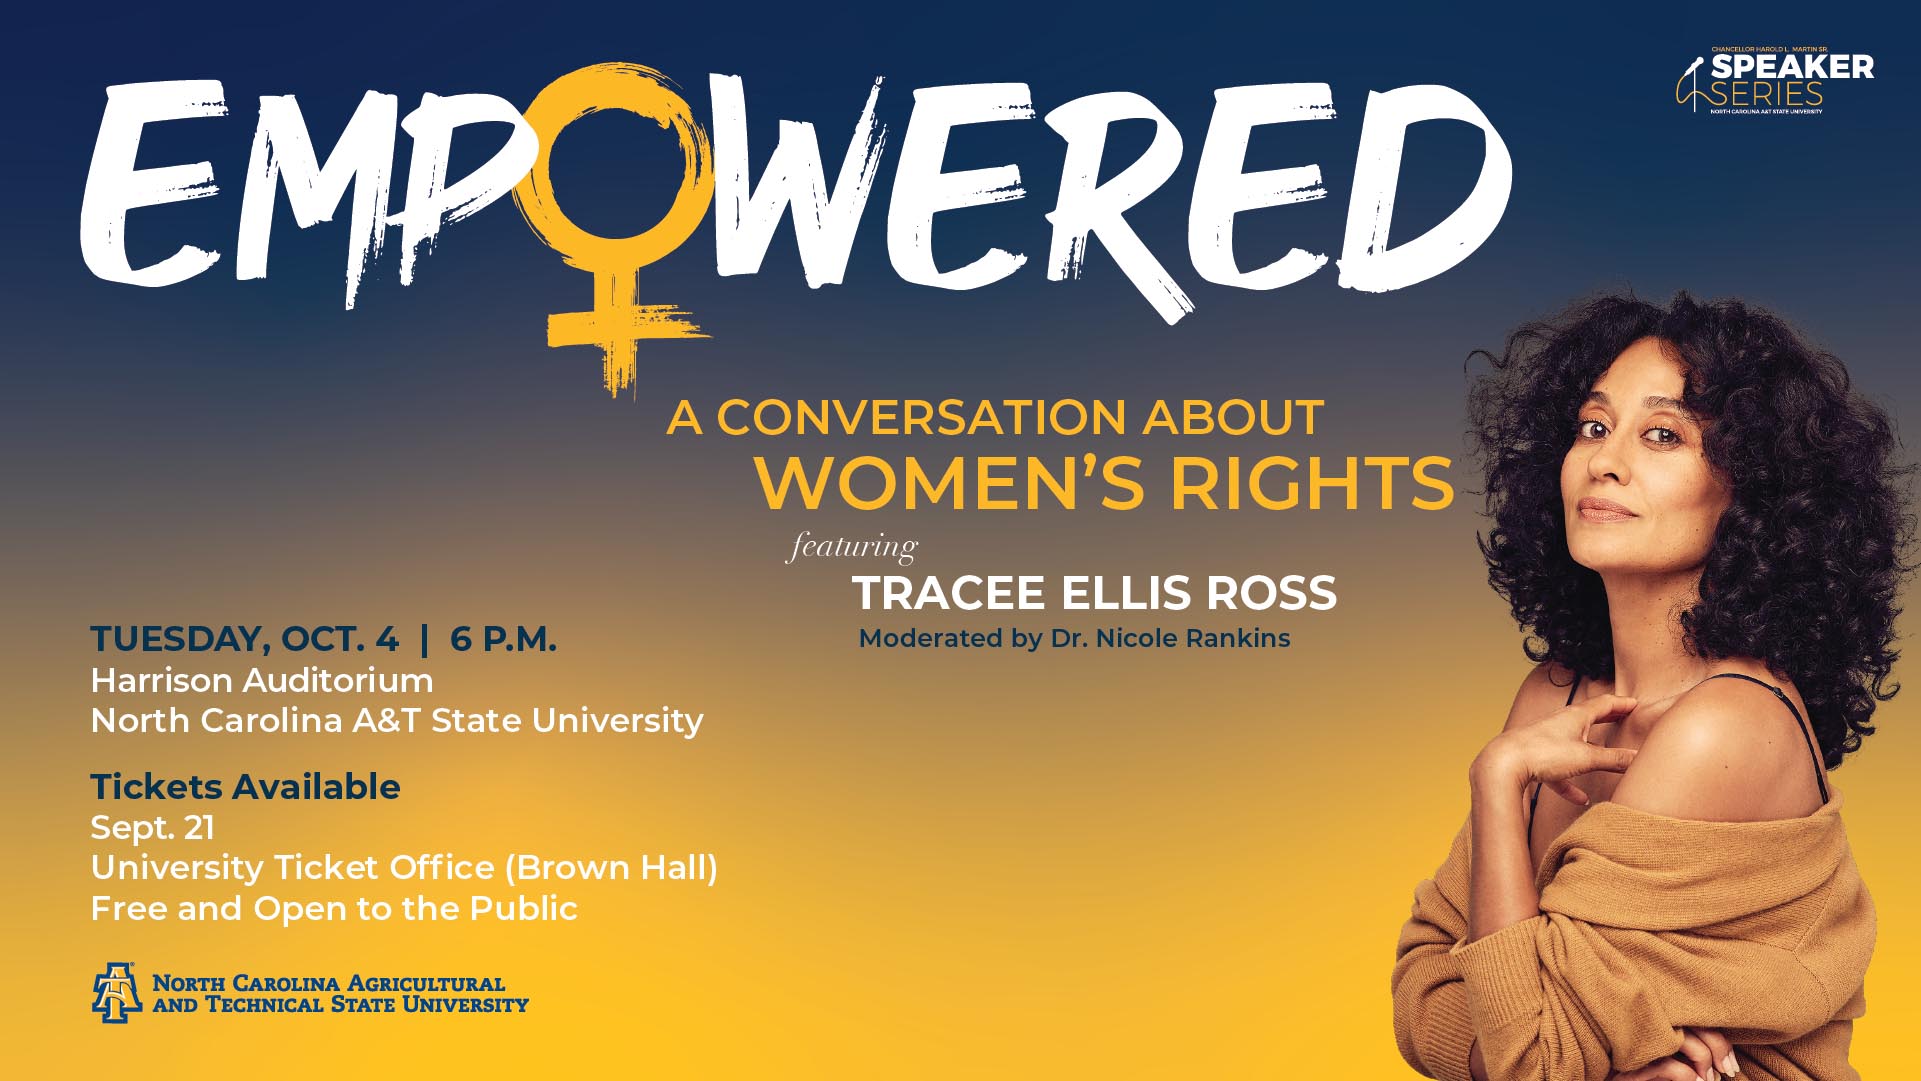 Chancellor's Speaker Series featuring Tracee Ellis Ross